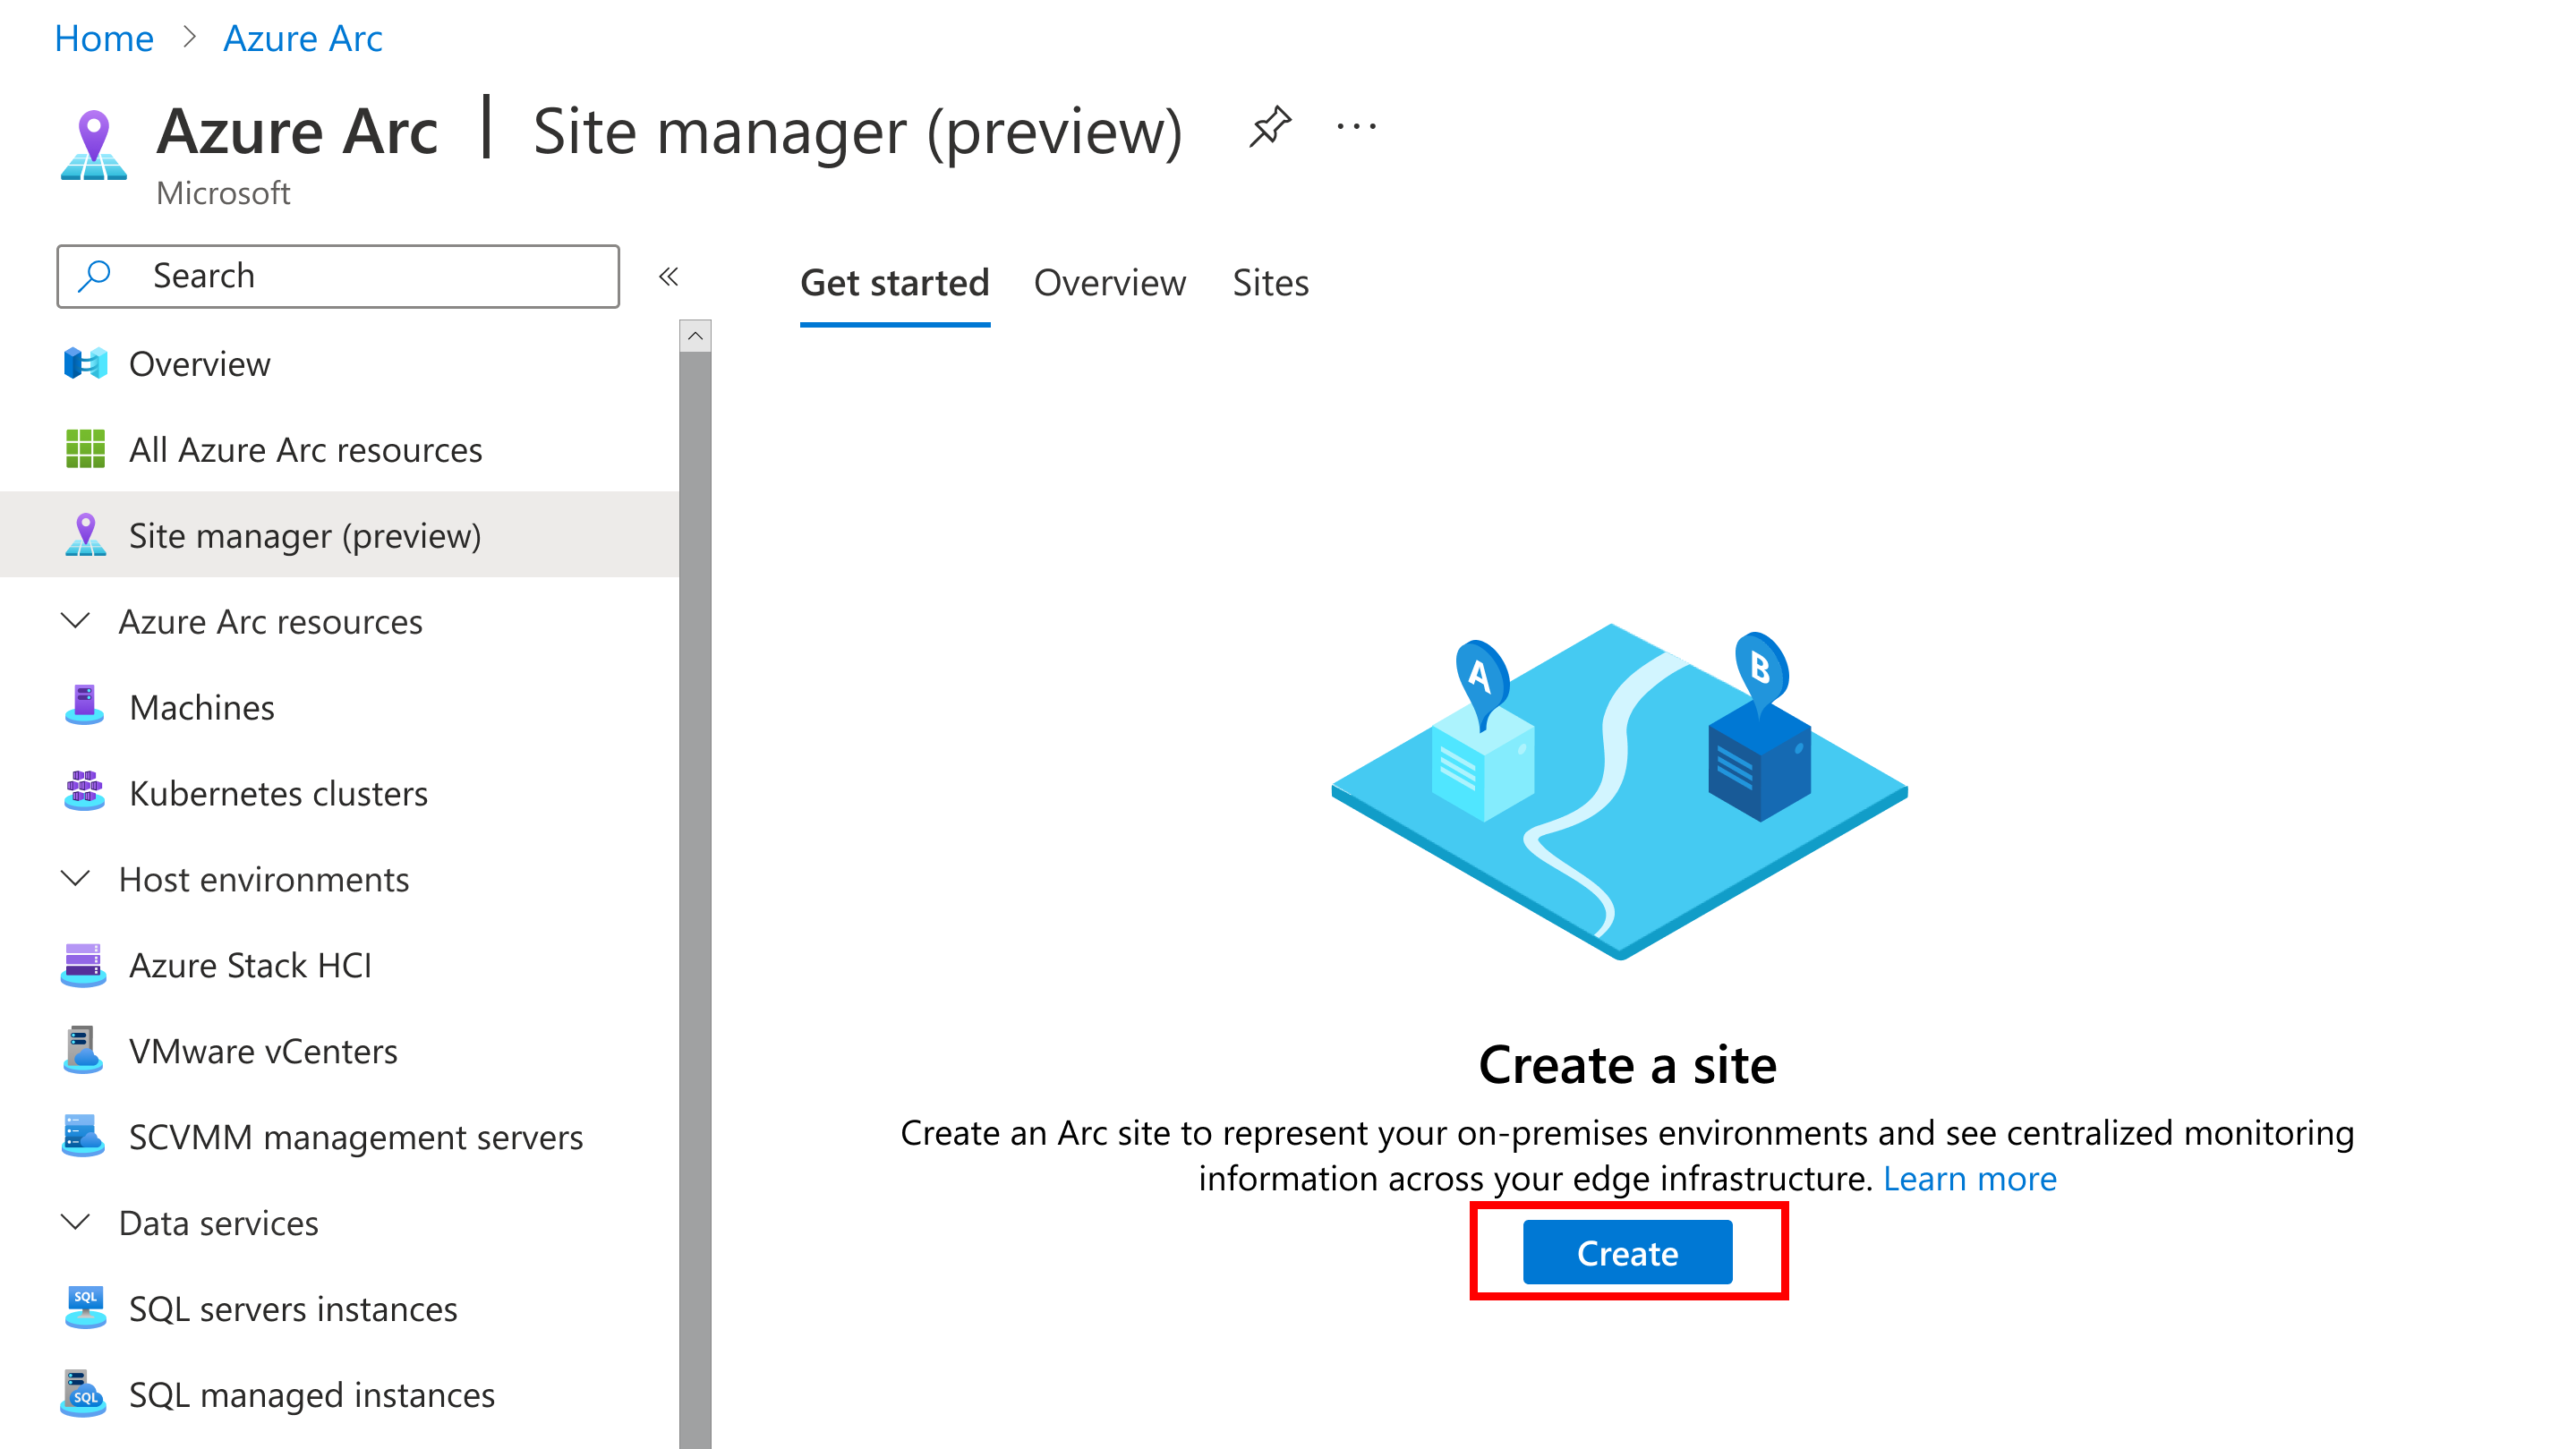 Screenshot that shows creating a site from the site manager overview.